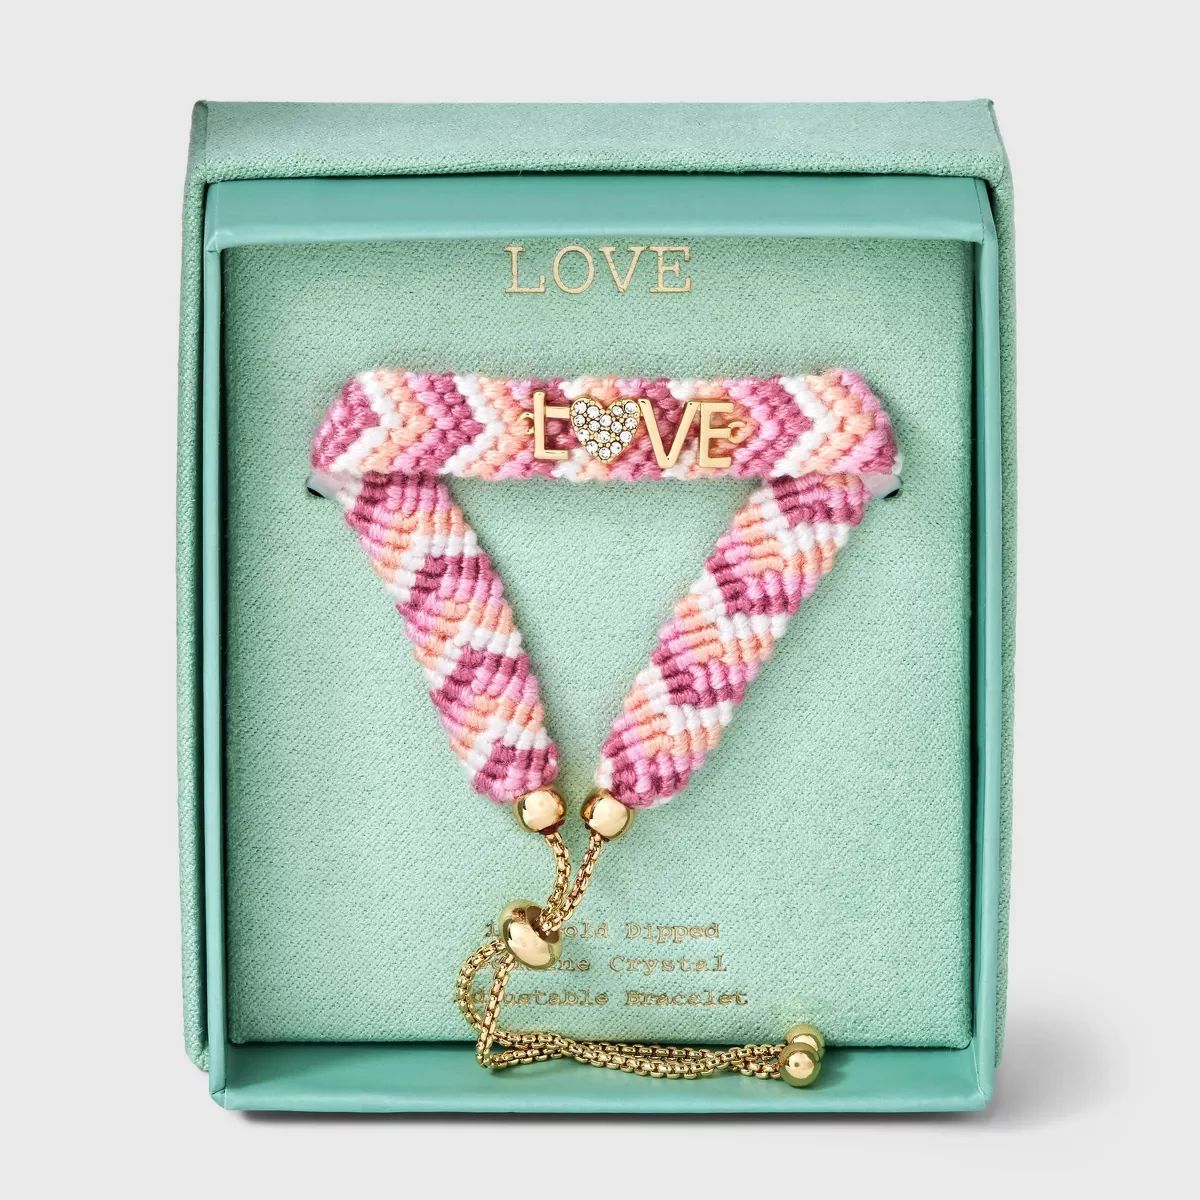 14K Gold Dipped "Love" with Crystal Heart Woven Adjustable Bracelet - A New Day™ Pink | Target